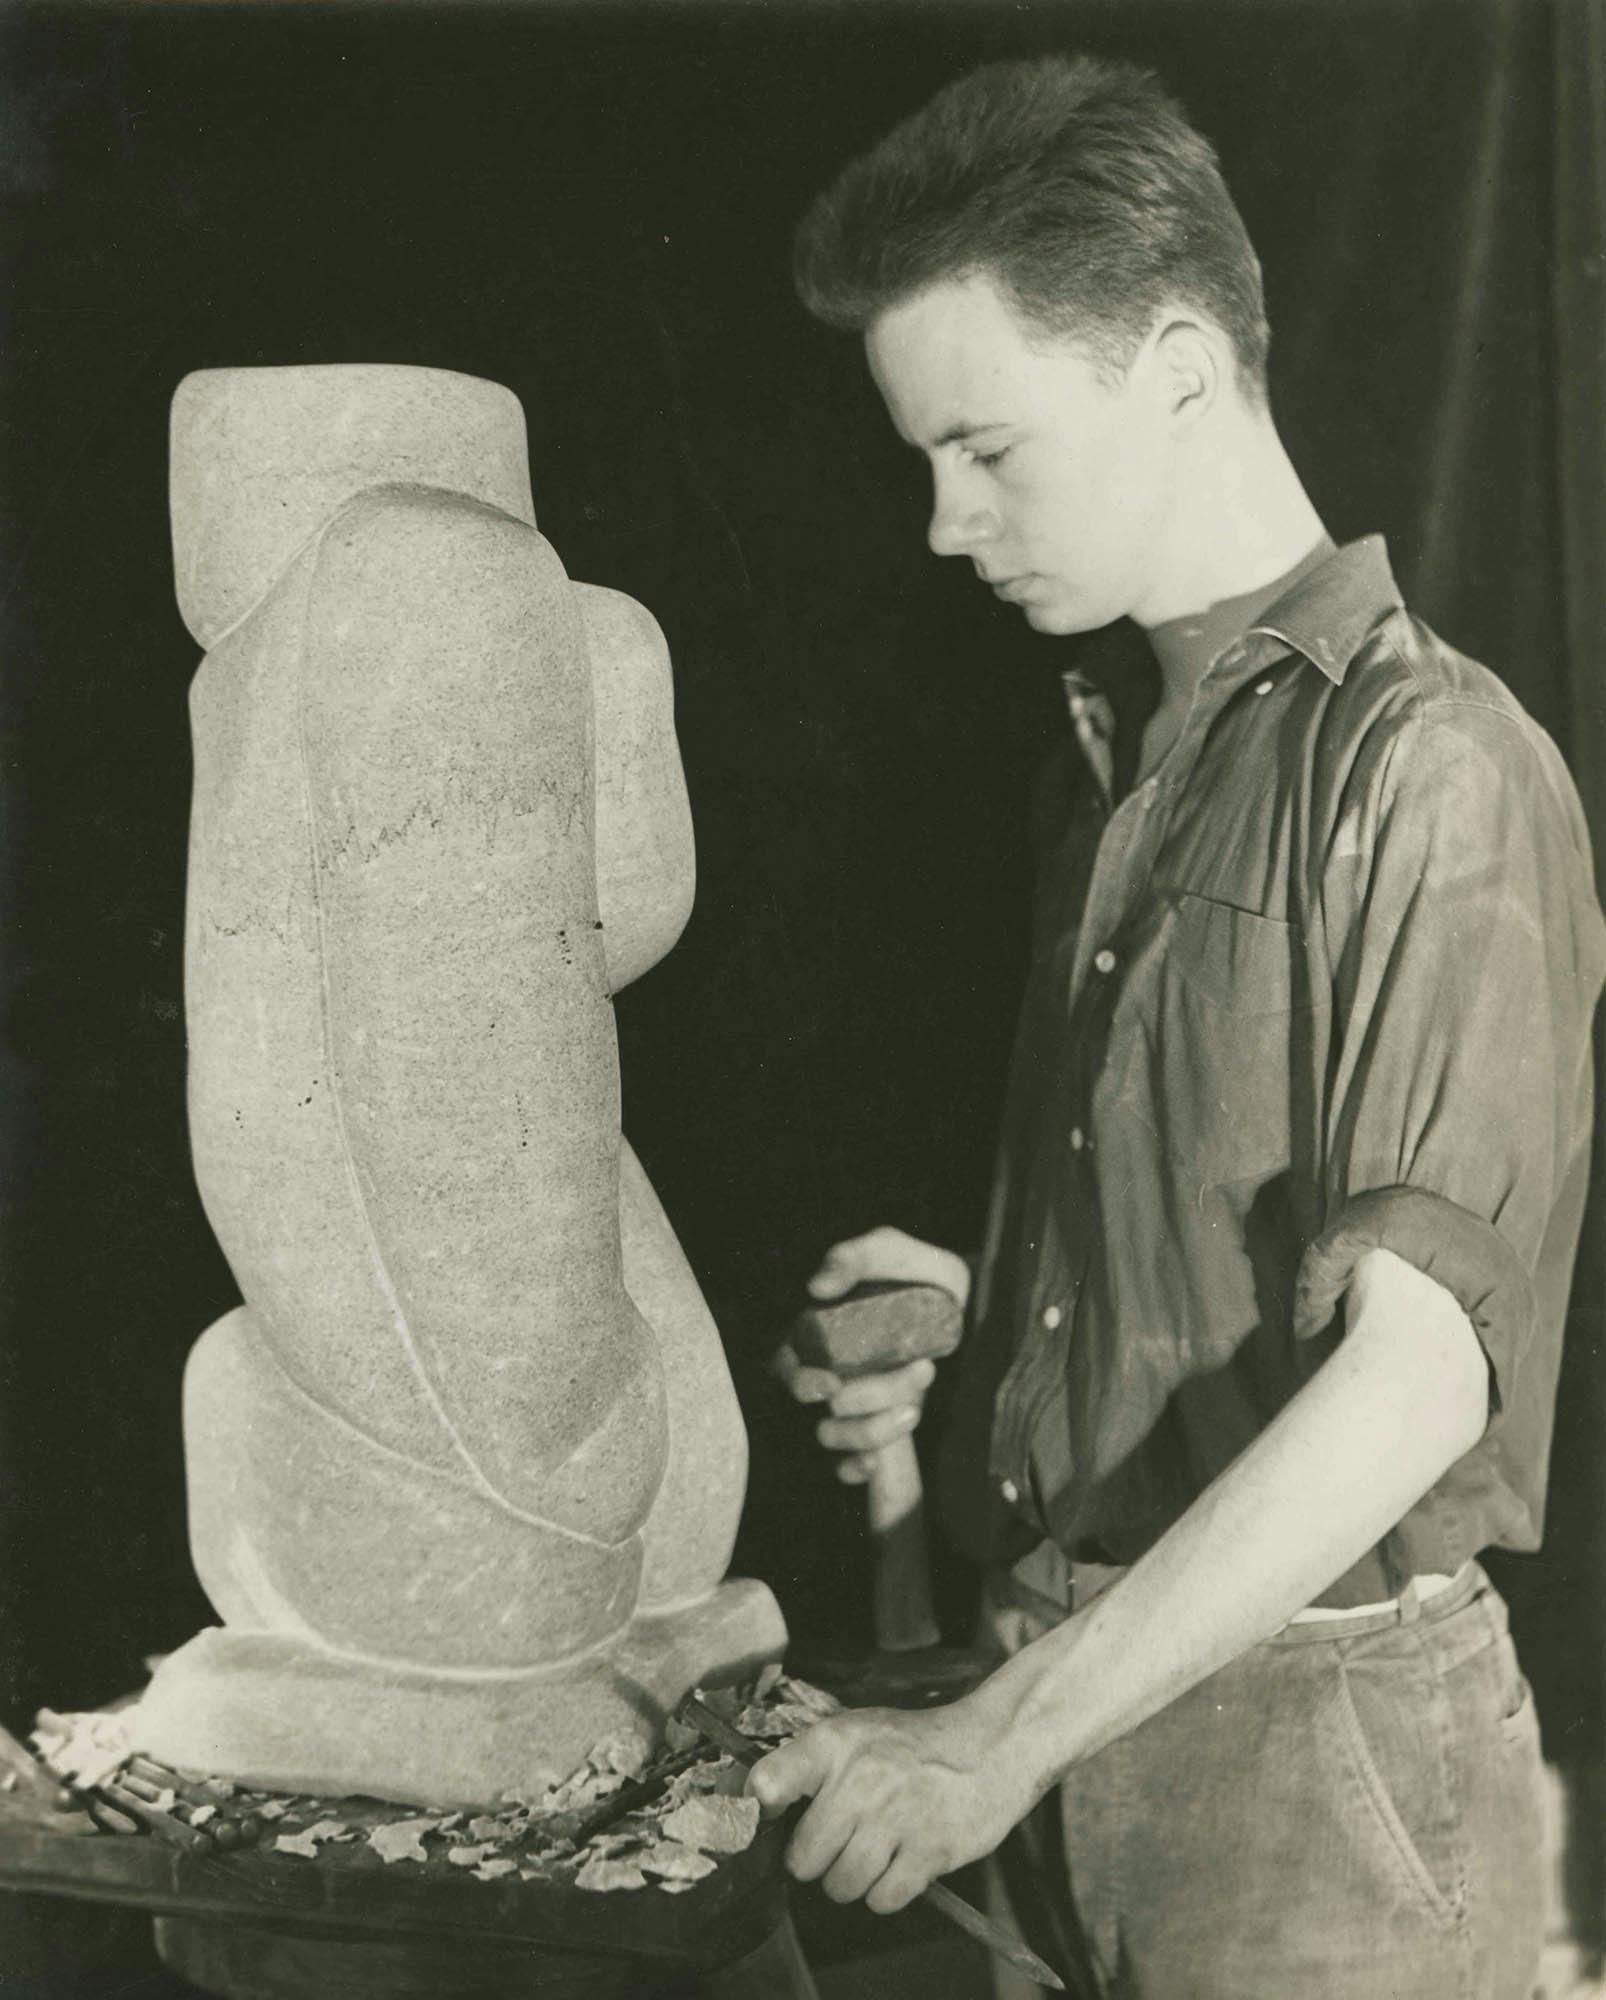 Richard Pousette-Dart with _[Tennessee Marble](https://pousette-dartfoundation.org/works/tennessee-marble/)_, c. 1937
 – The Richard Pousette-Dart Foundation